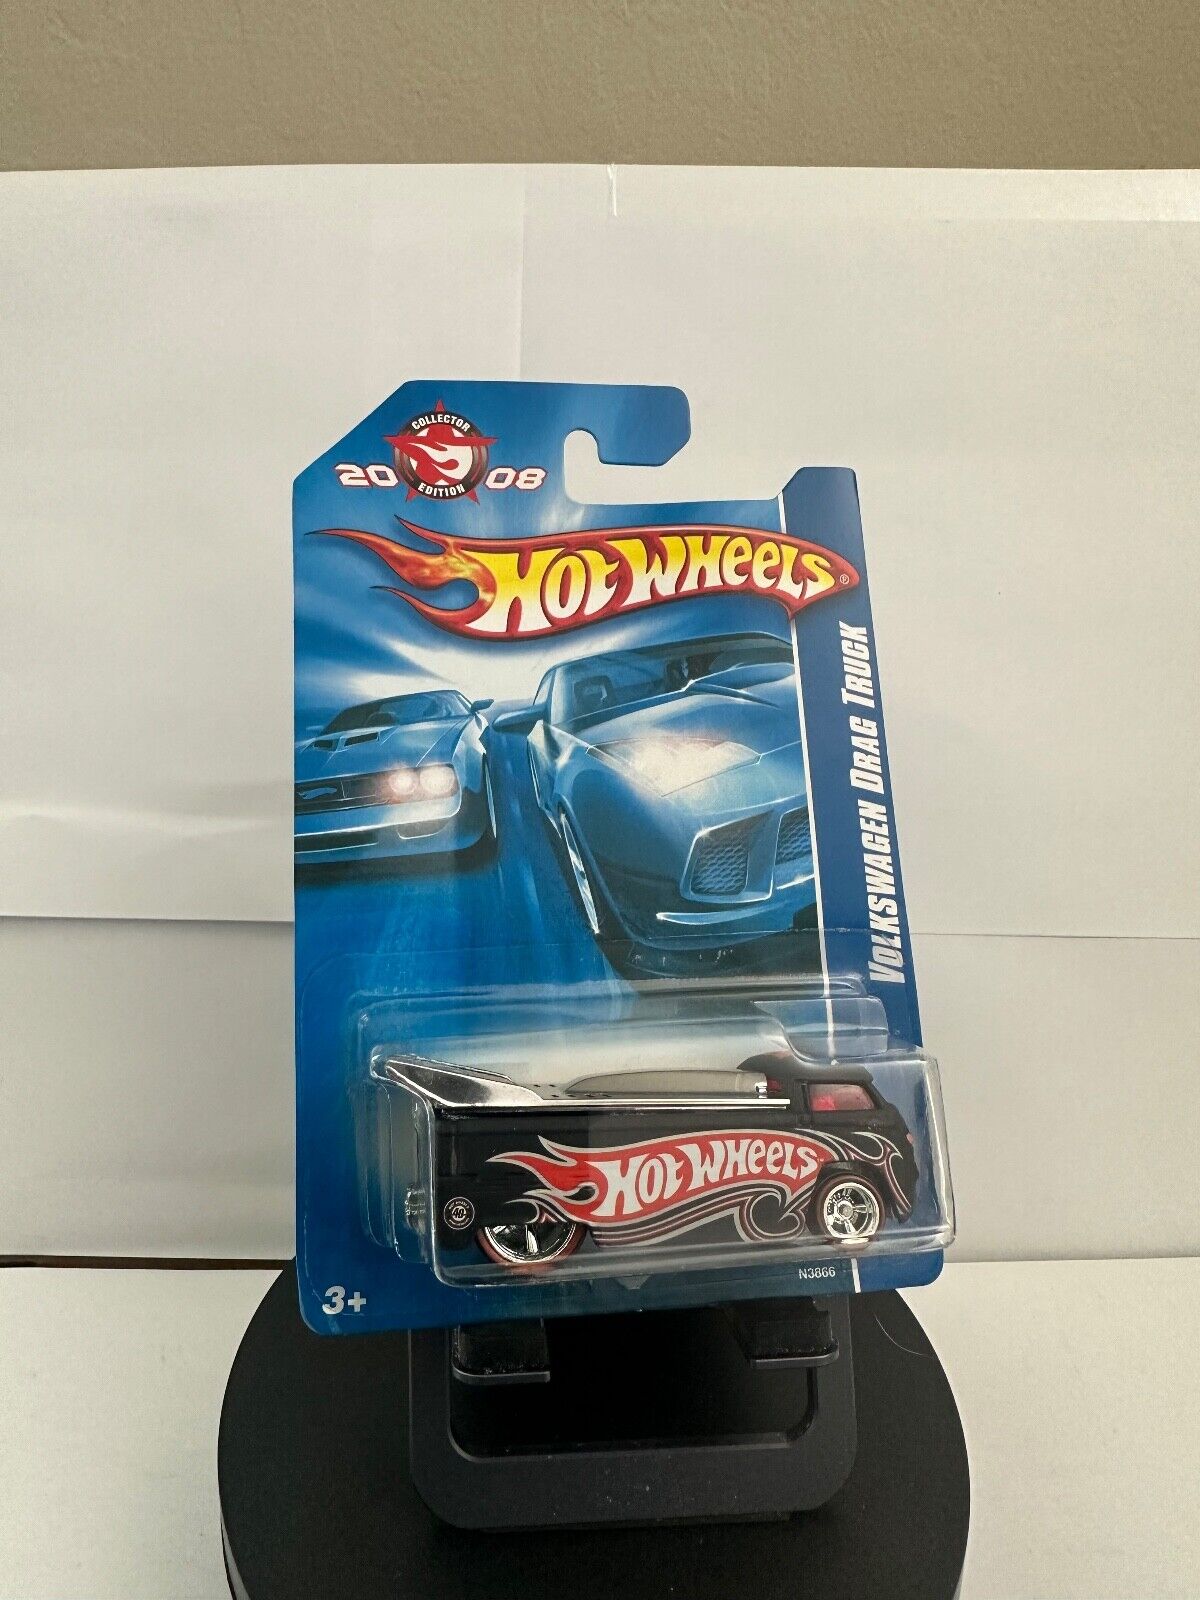 Hot Wheels 2008 Volkswagen Drag Truck Collector Edition Mail-In Real Riders L62